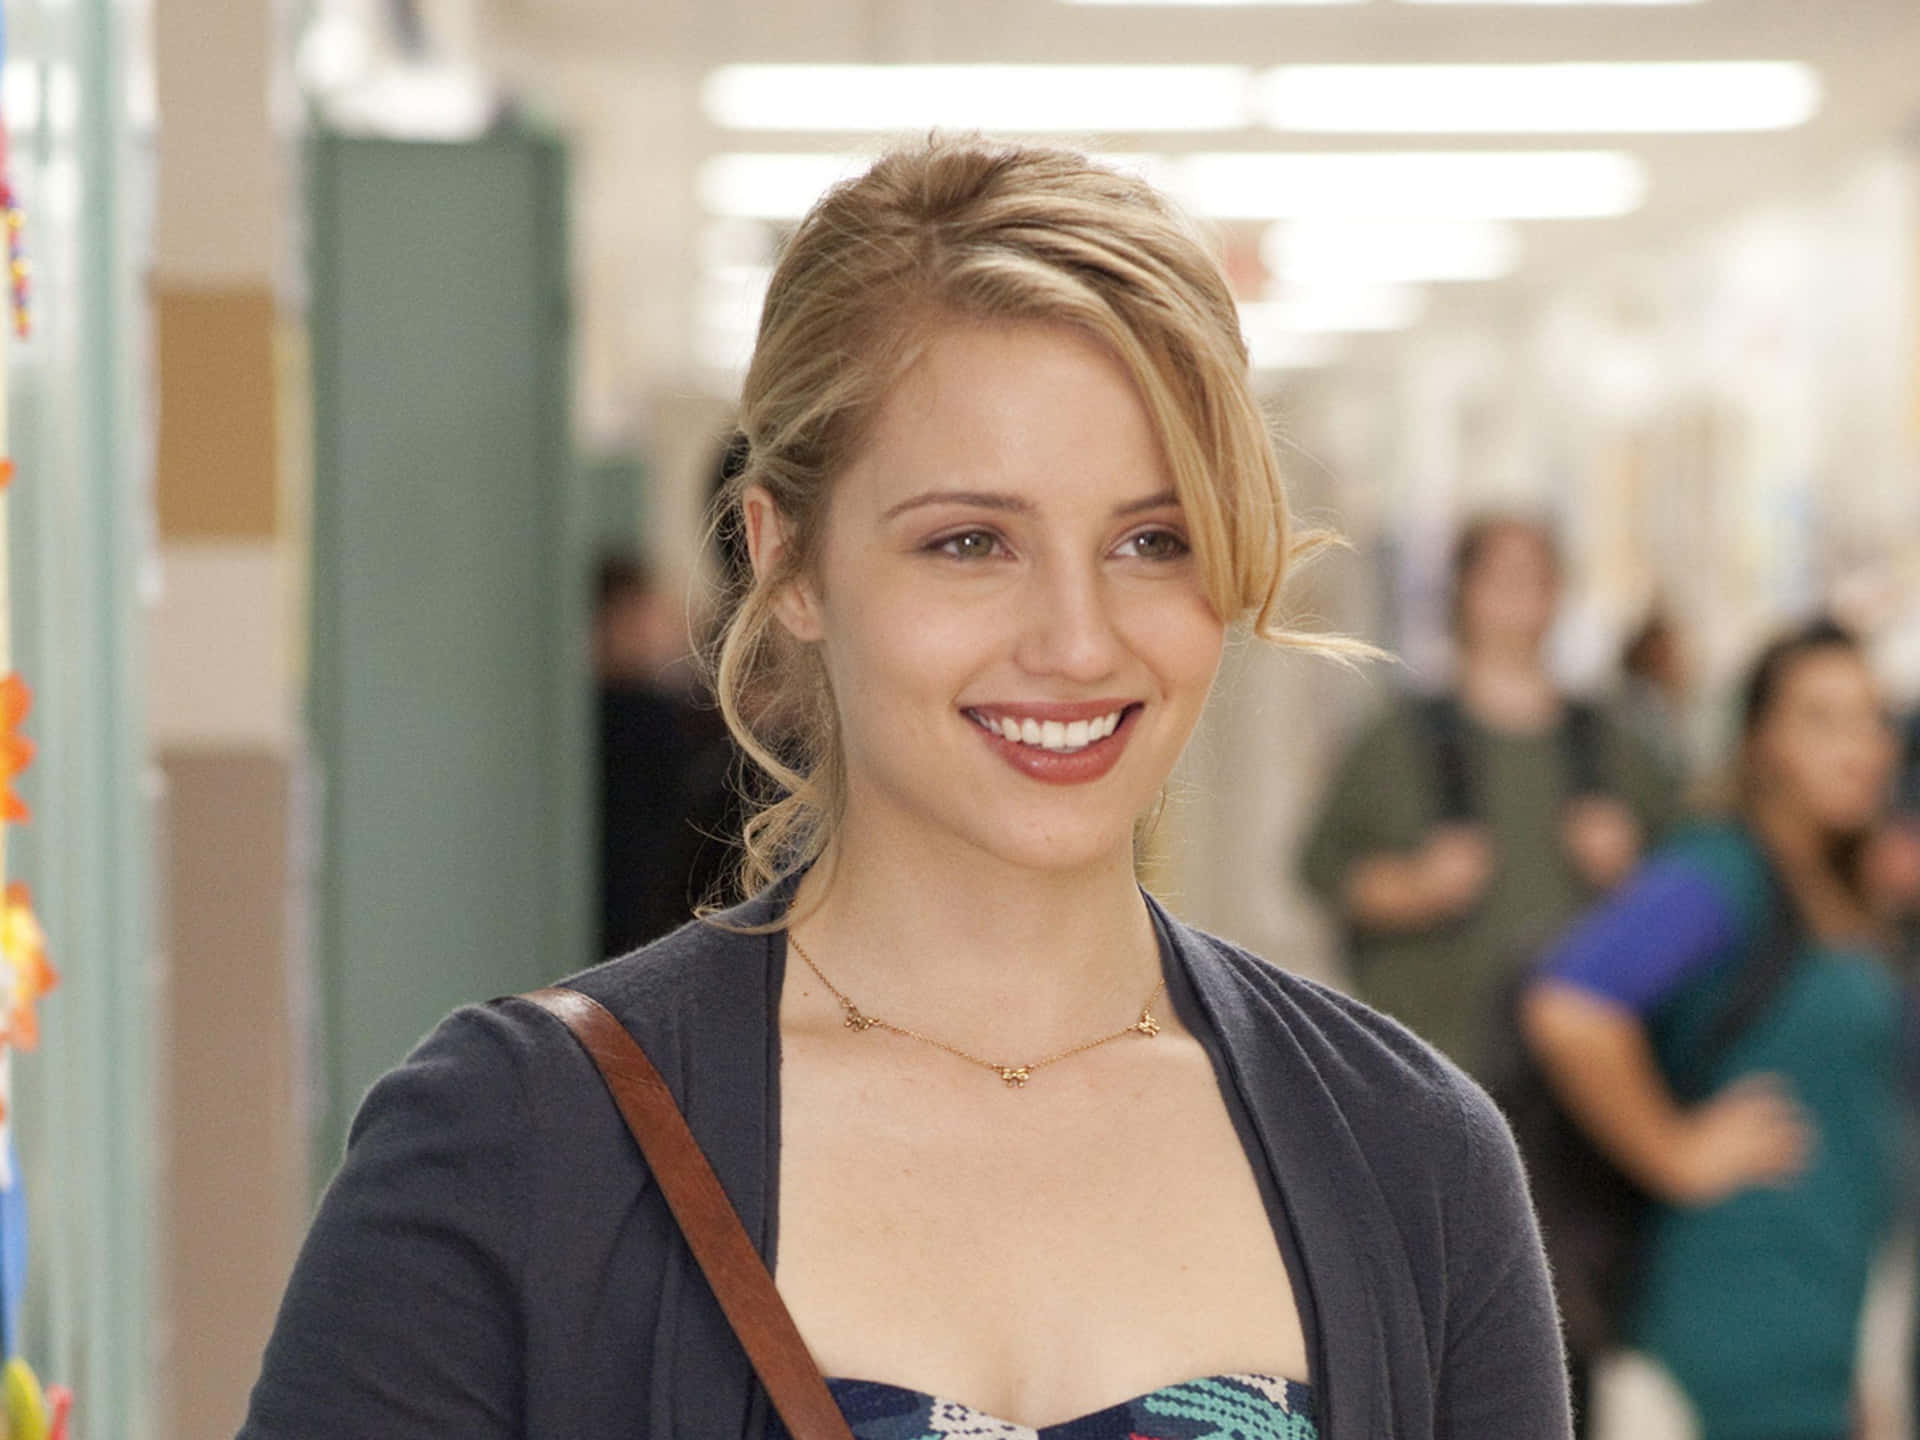 dianna agron wallpaper i am number four